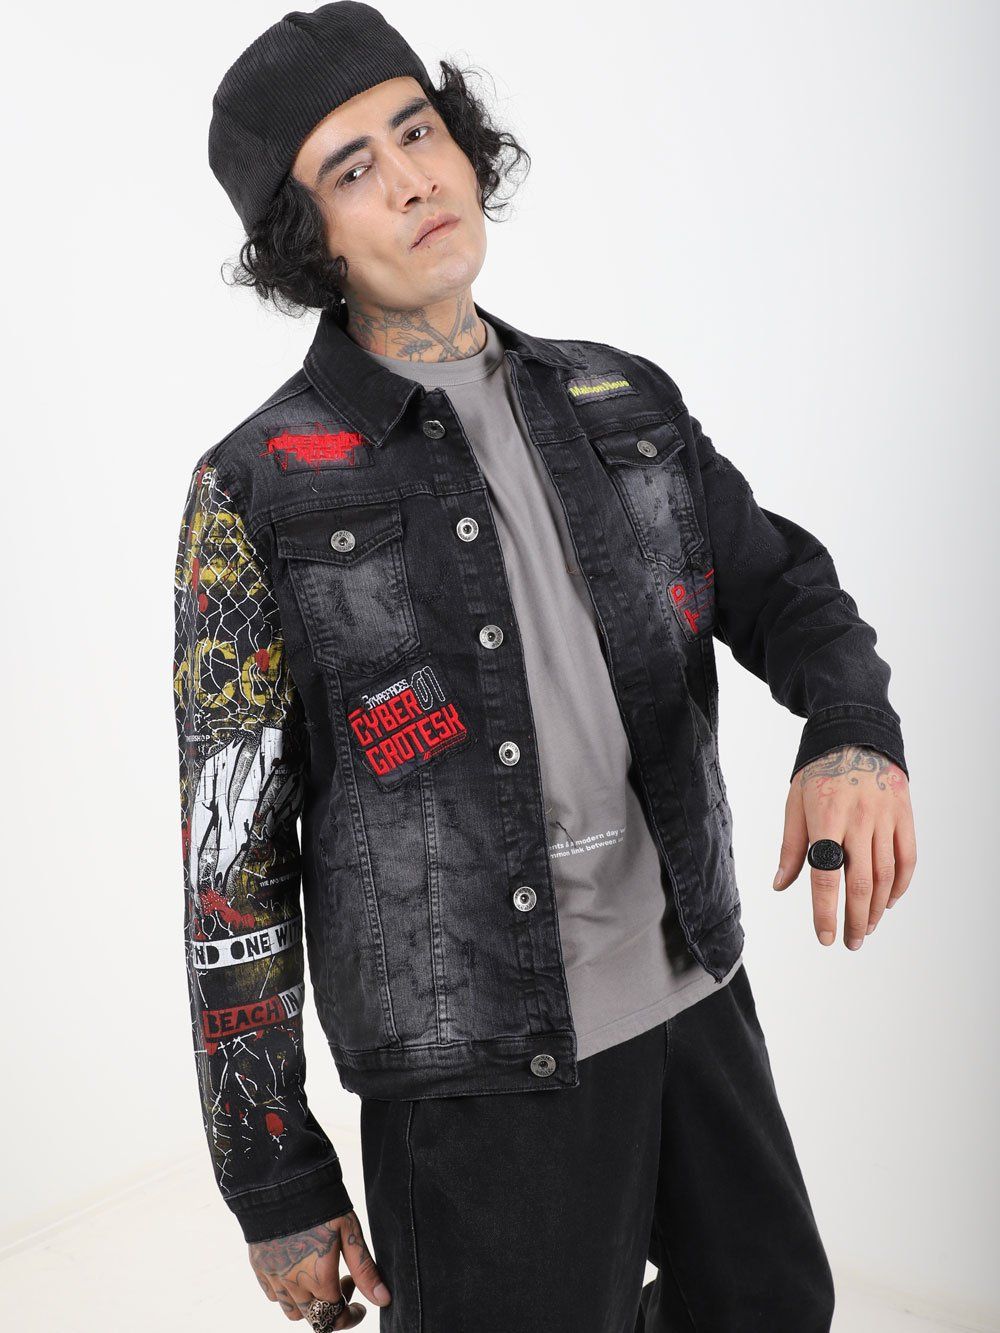 A man wearing a JETMAN denim jacket with patches.